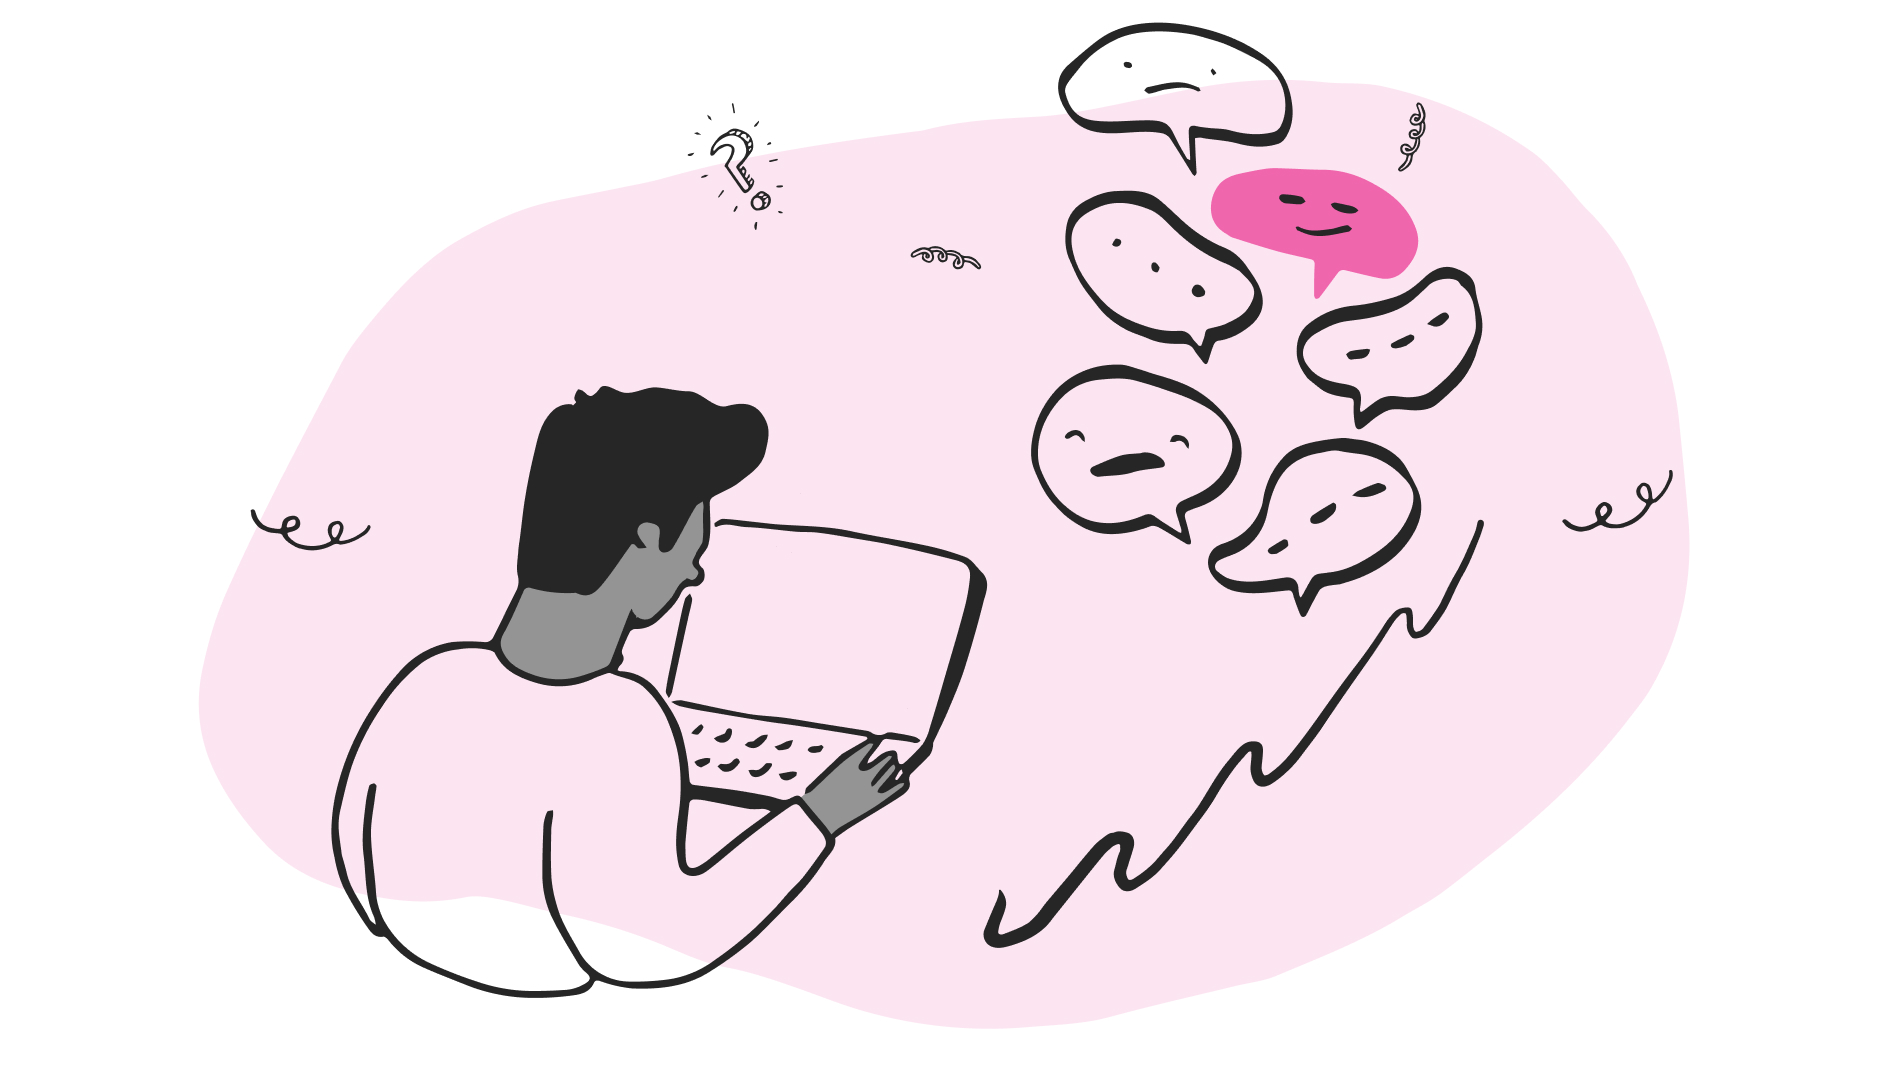 Stylised illustration on a pink background showing a person in profile view, working on a laptop. Above and to the right of the person are seven speech bubbles, one of which is colored pink, indicating active communication or a flow of ideas. Surrounding elements include a question mark, small doodles and squiggly lines, suggesting a creative or brainstorming session.